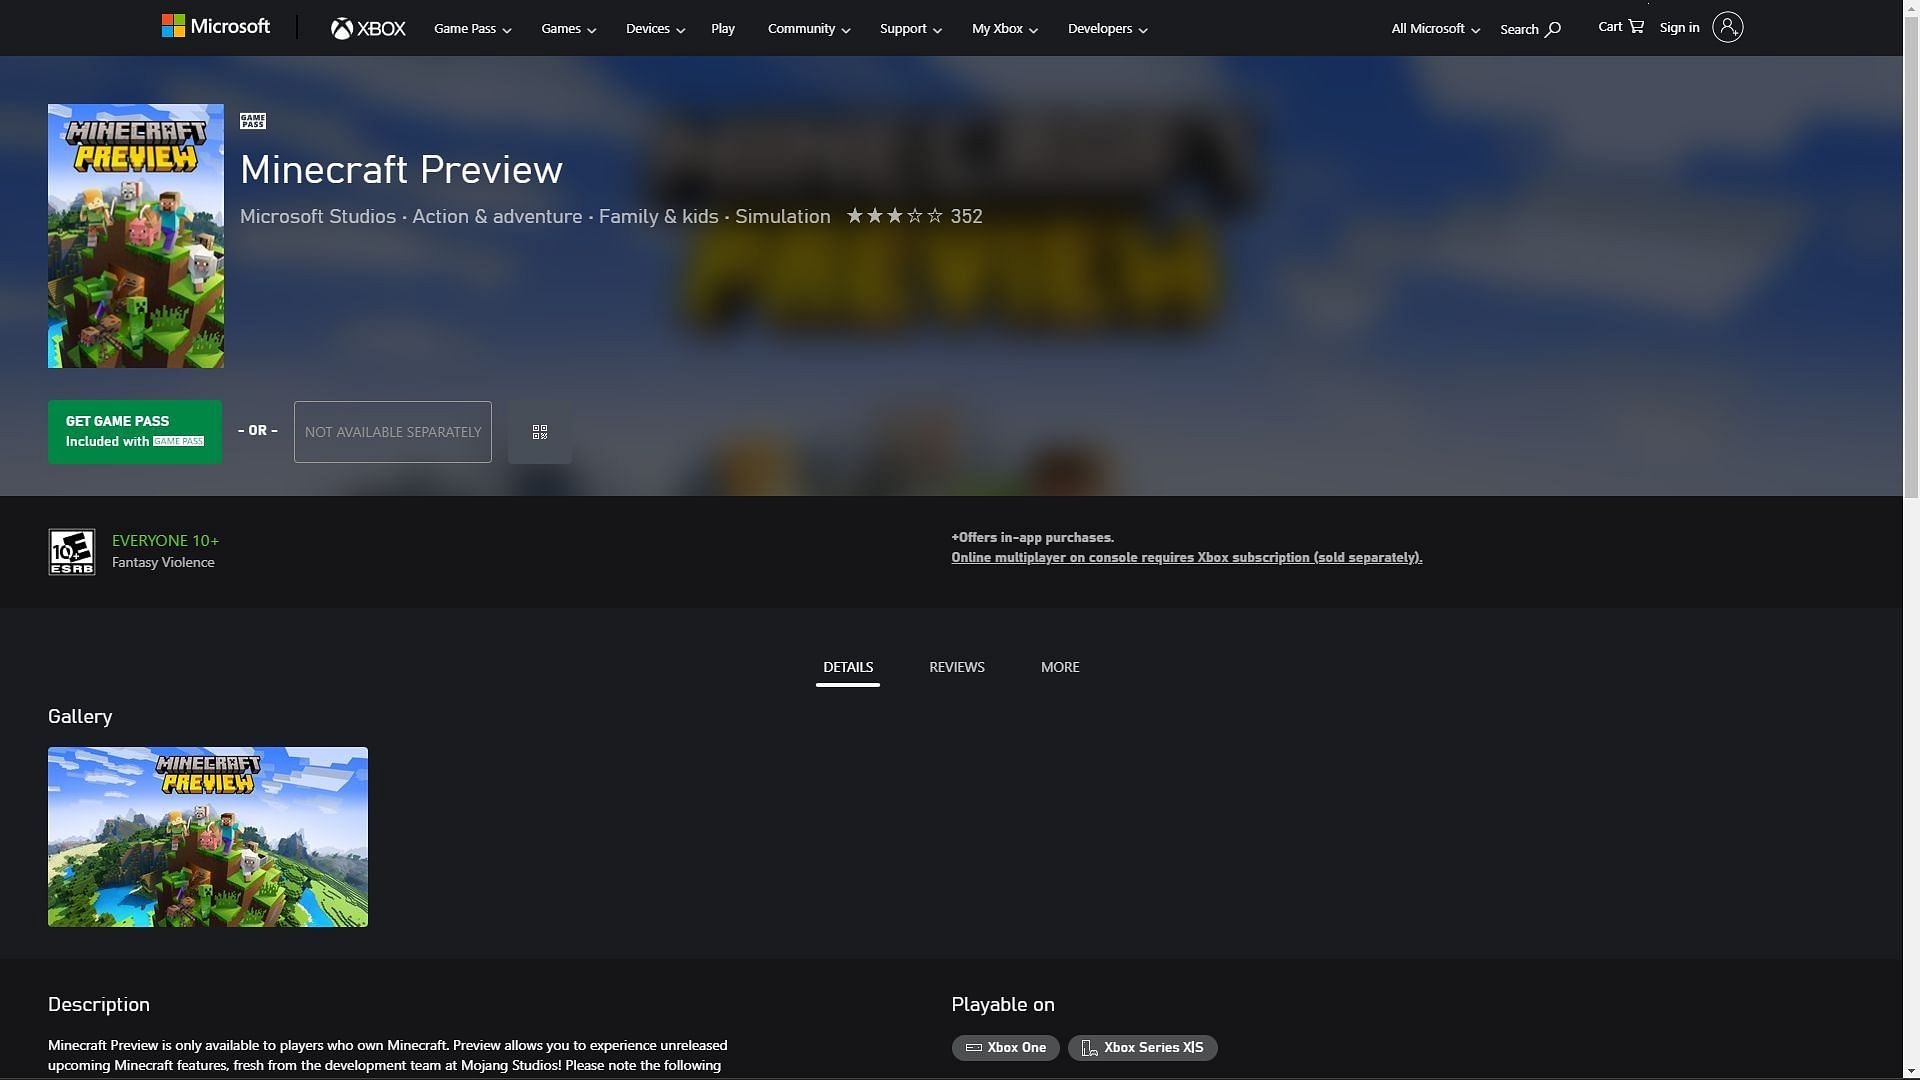 Product page for Minecraft beta and preview on Xbox (Image via Sportskeeda)